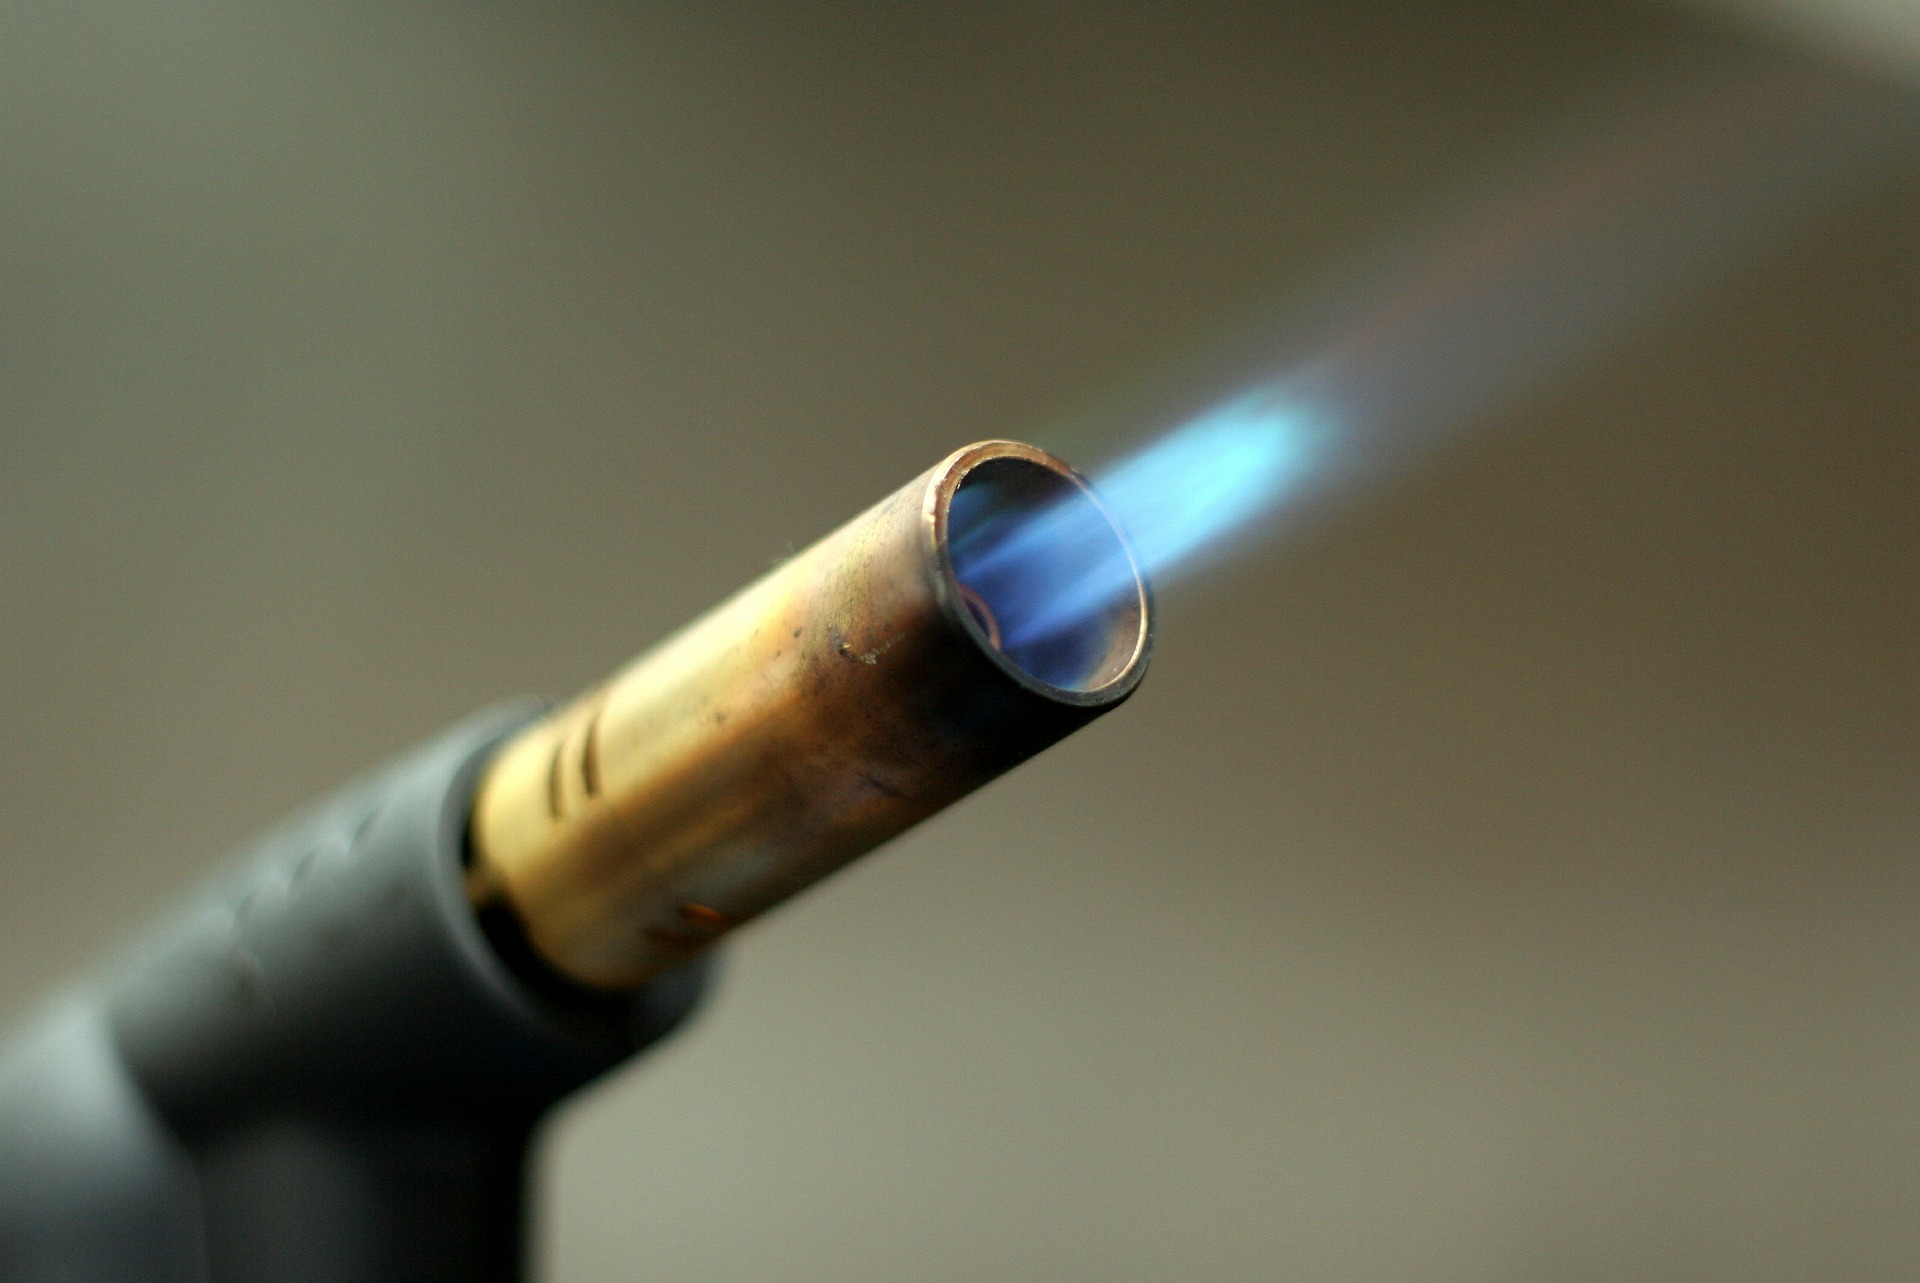 Uses of a Butane Torch